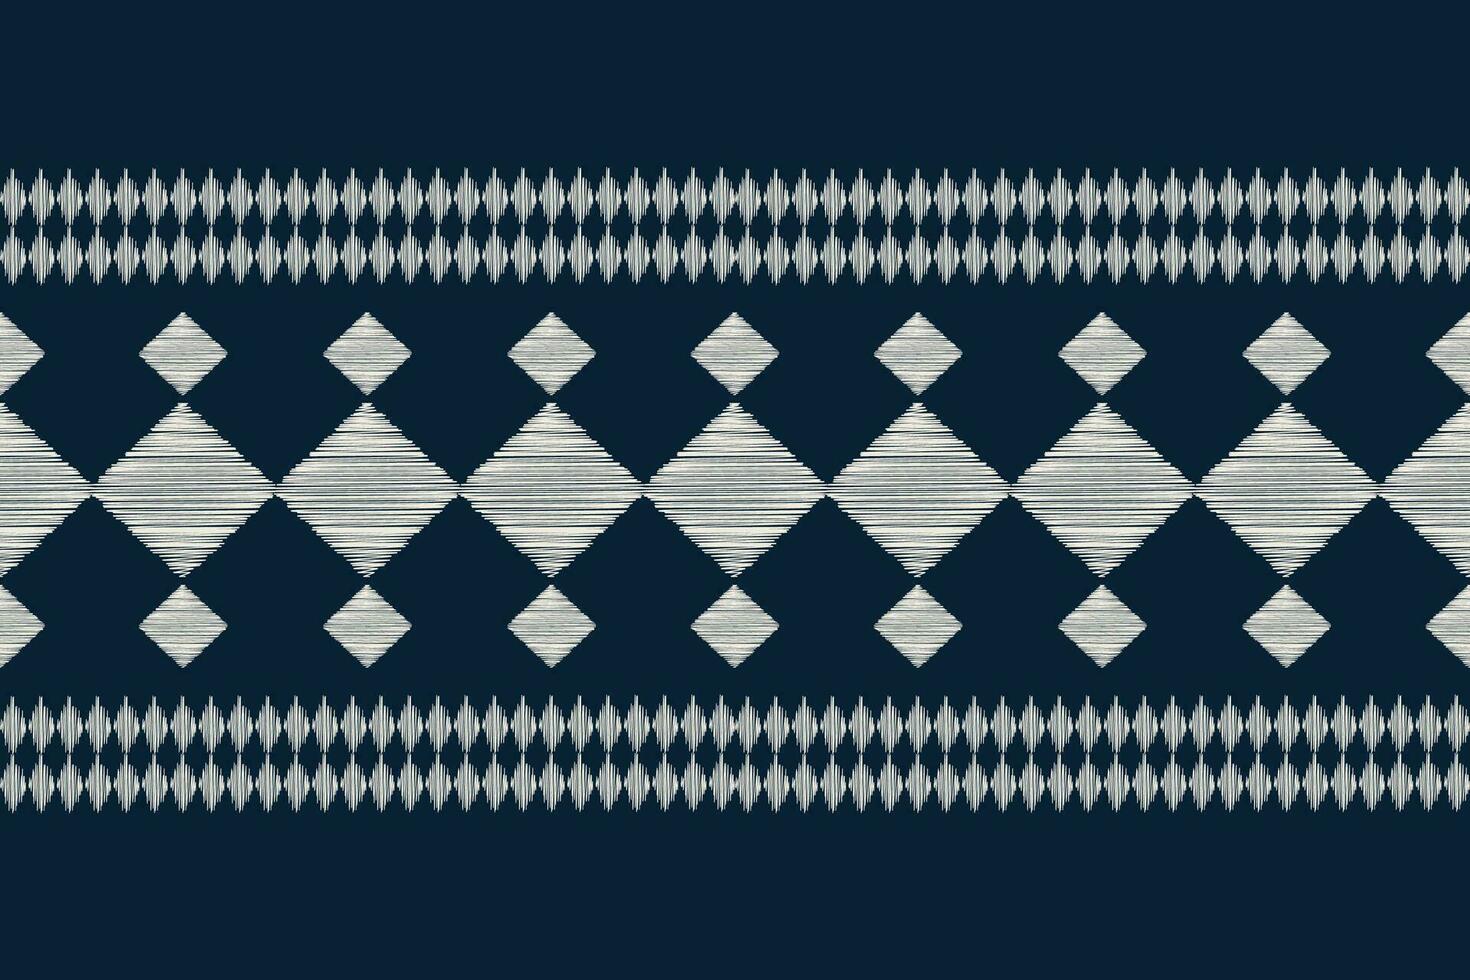 Ethnic Ikat fabric pattern geometric style.African Ikat embroidery Ethnic oriental pattern blue background. Abstract,vector,illustration.Texture,clothing,frame,decoration,motif. vector